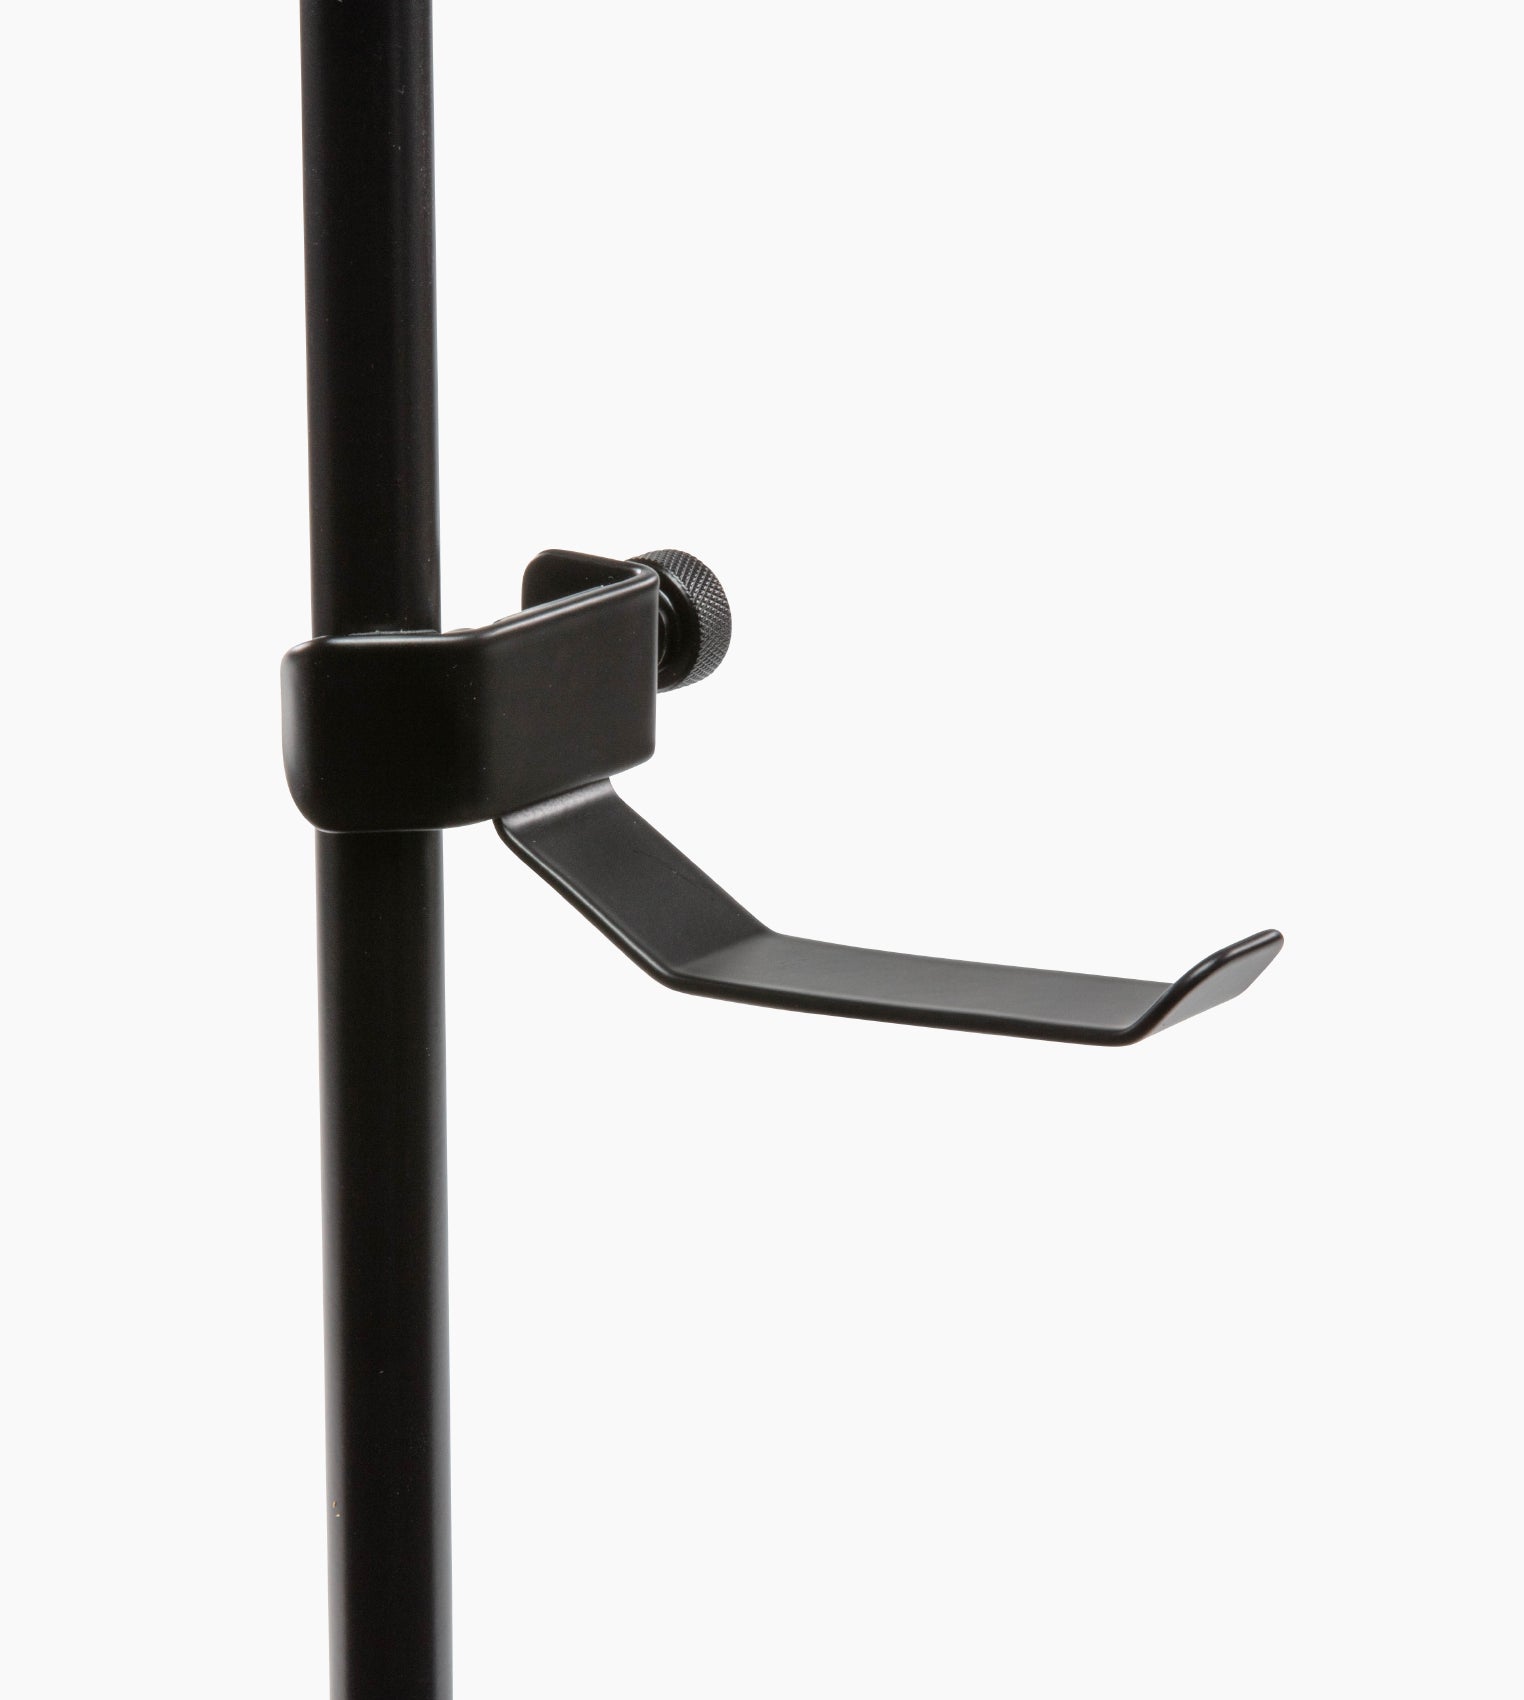 close-up of mic-stand mounted headphone hanger